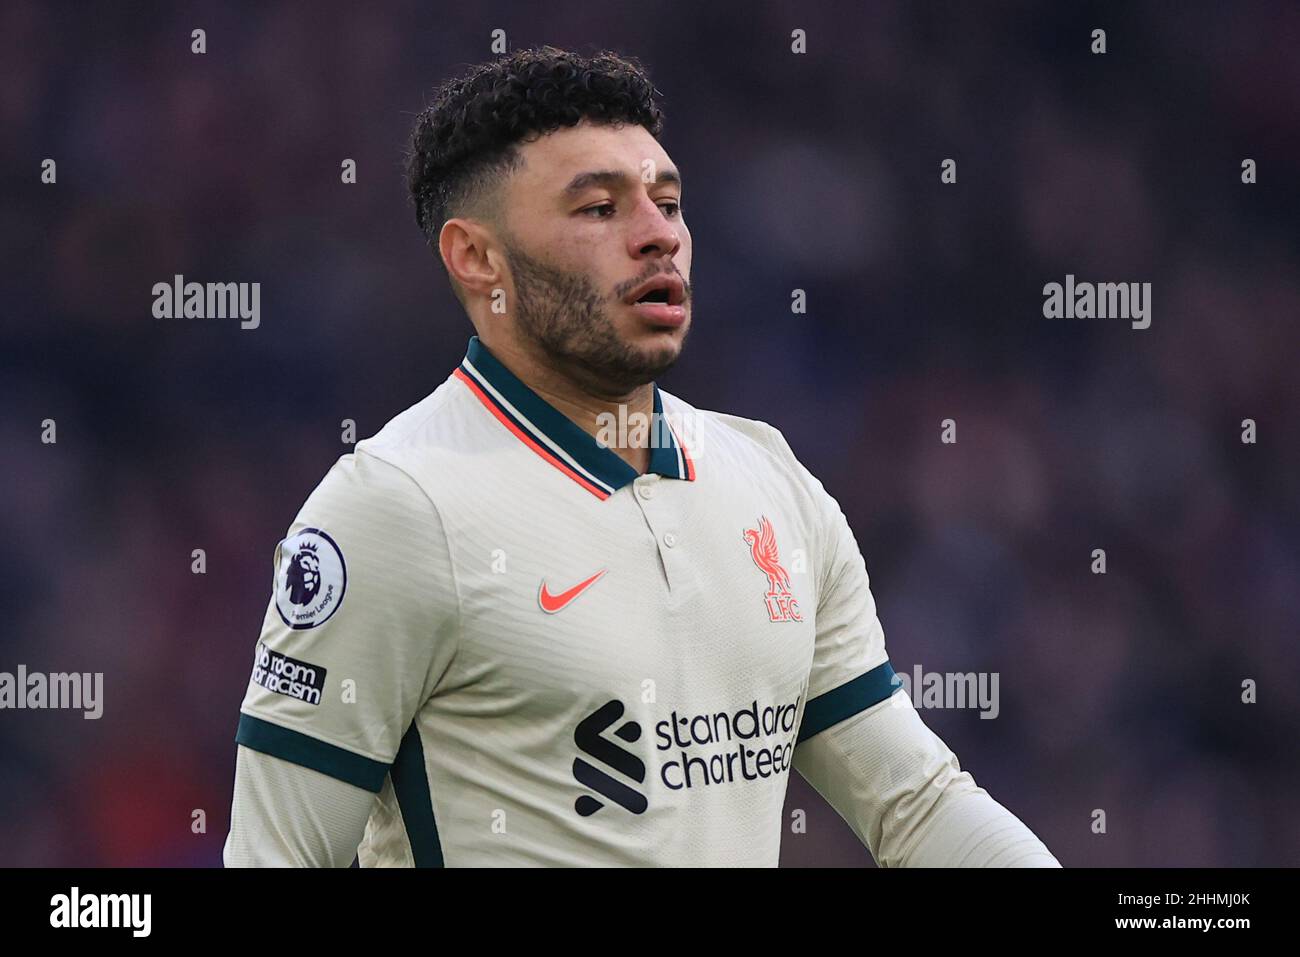 Alex Oxlade-Chamberlain #15 of Liverpool during the game Stock Photo